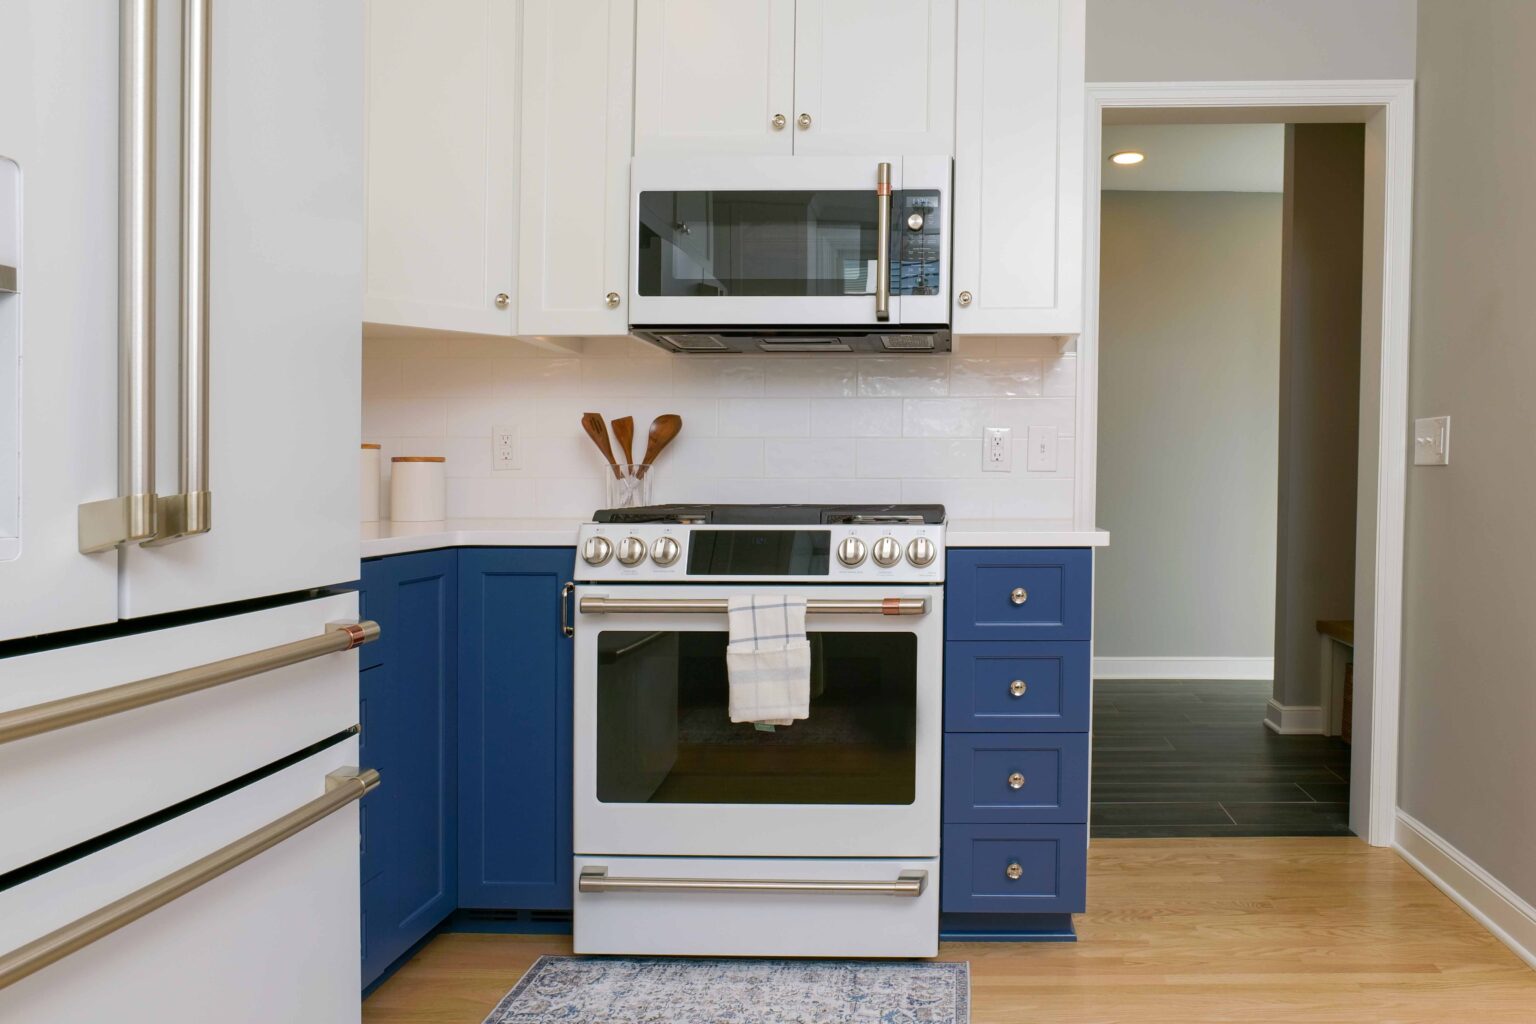 A modern kitchen on Hampshire Drive features a white and blue color scheme, with a white refrigerator, blue lower cabinets, a white oven with a towel hanging, and a white microwave above. This remodel seamlessly blends style and functionality.